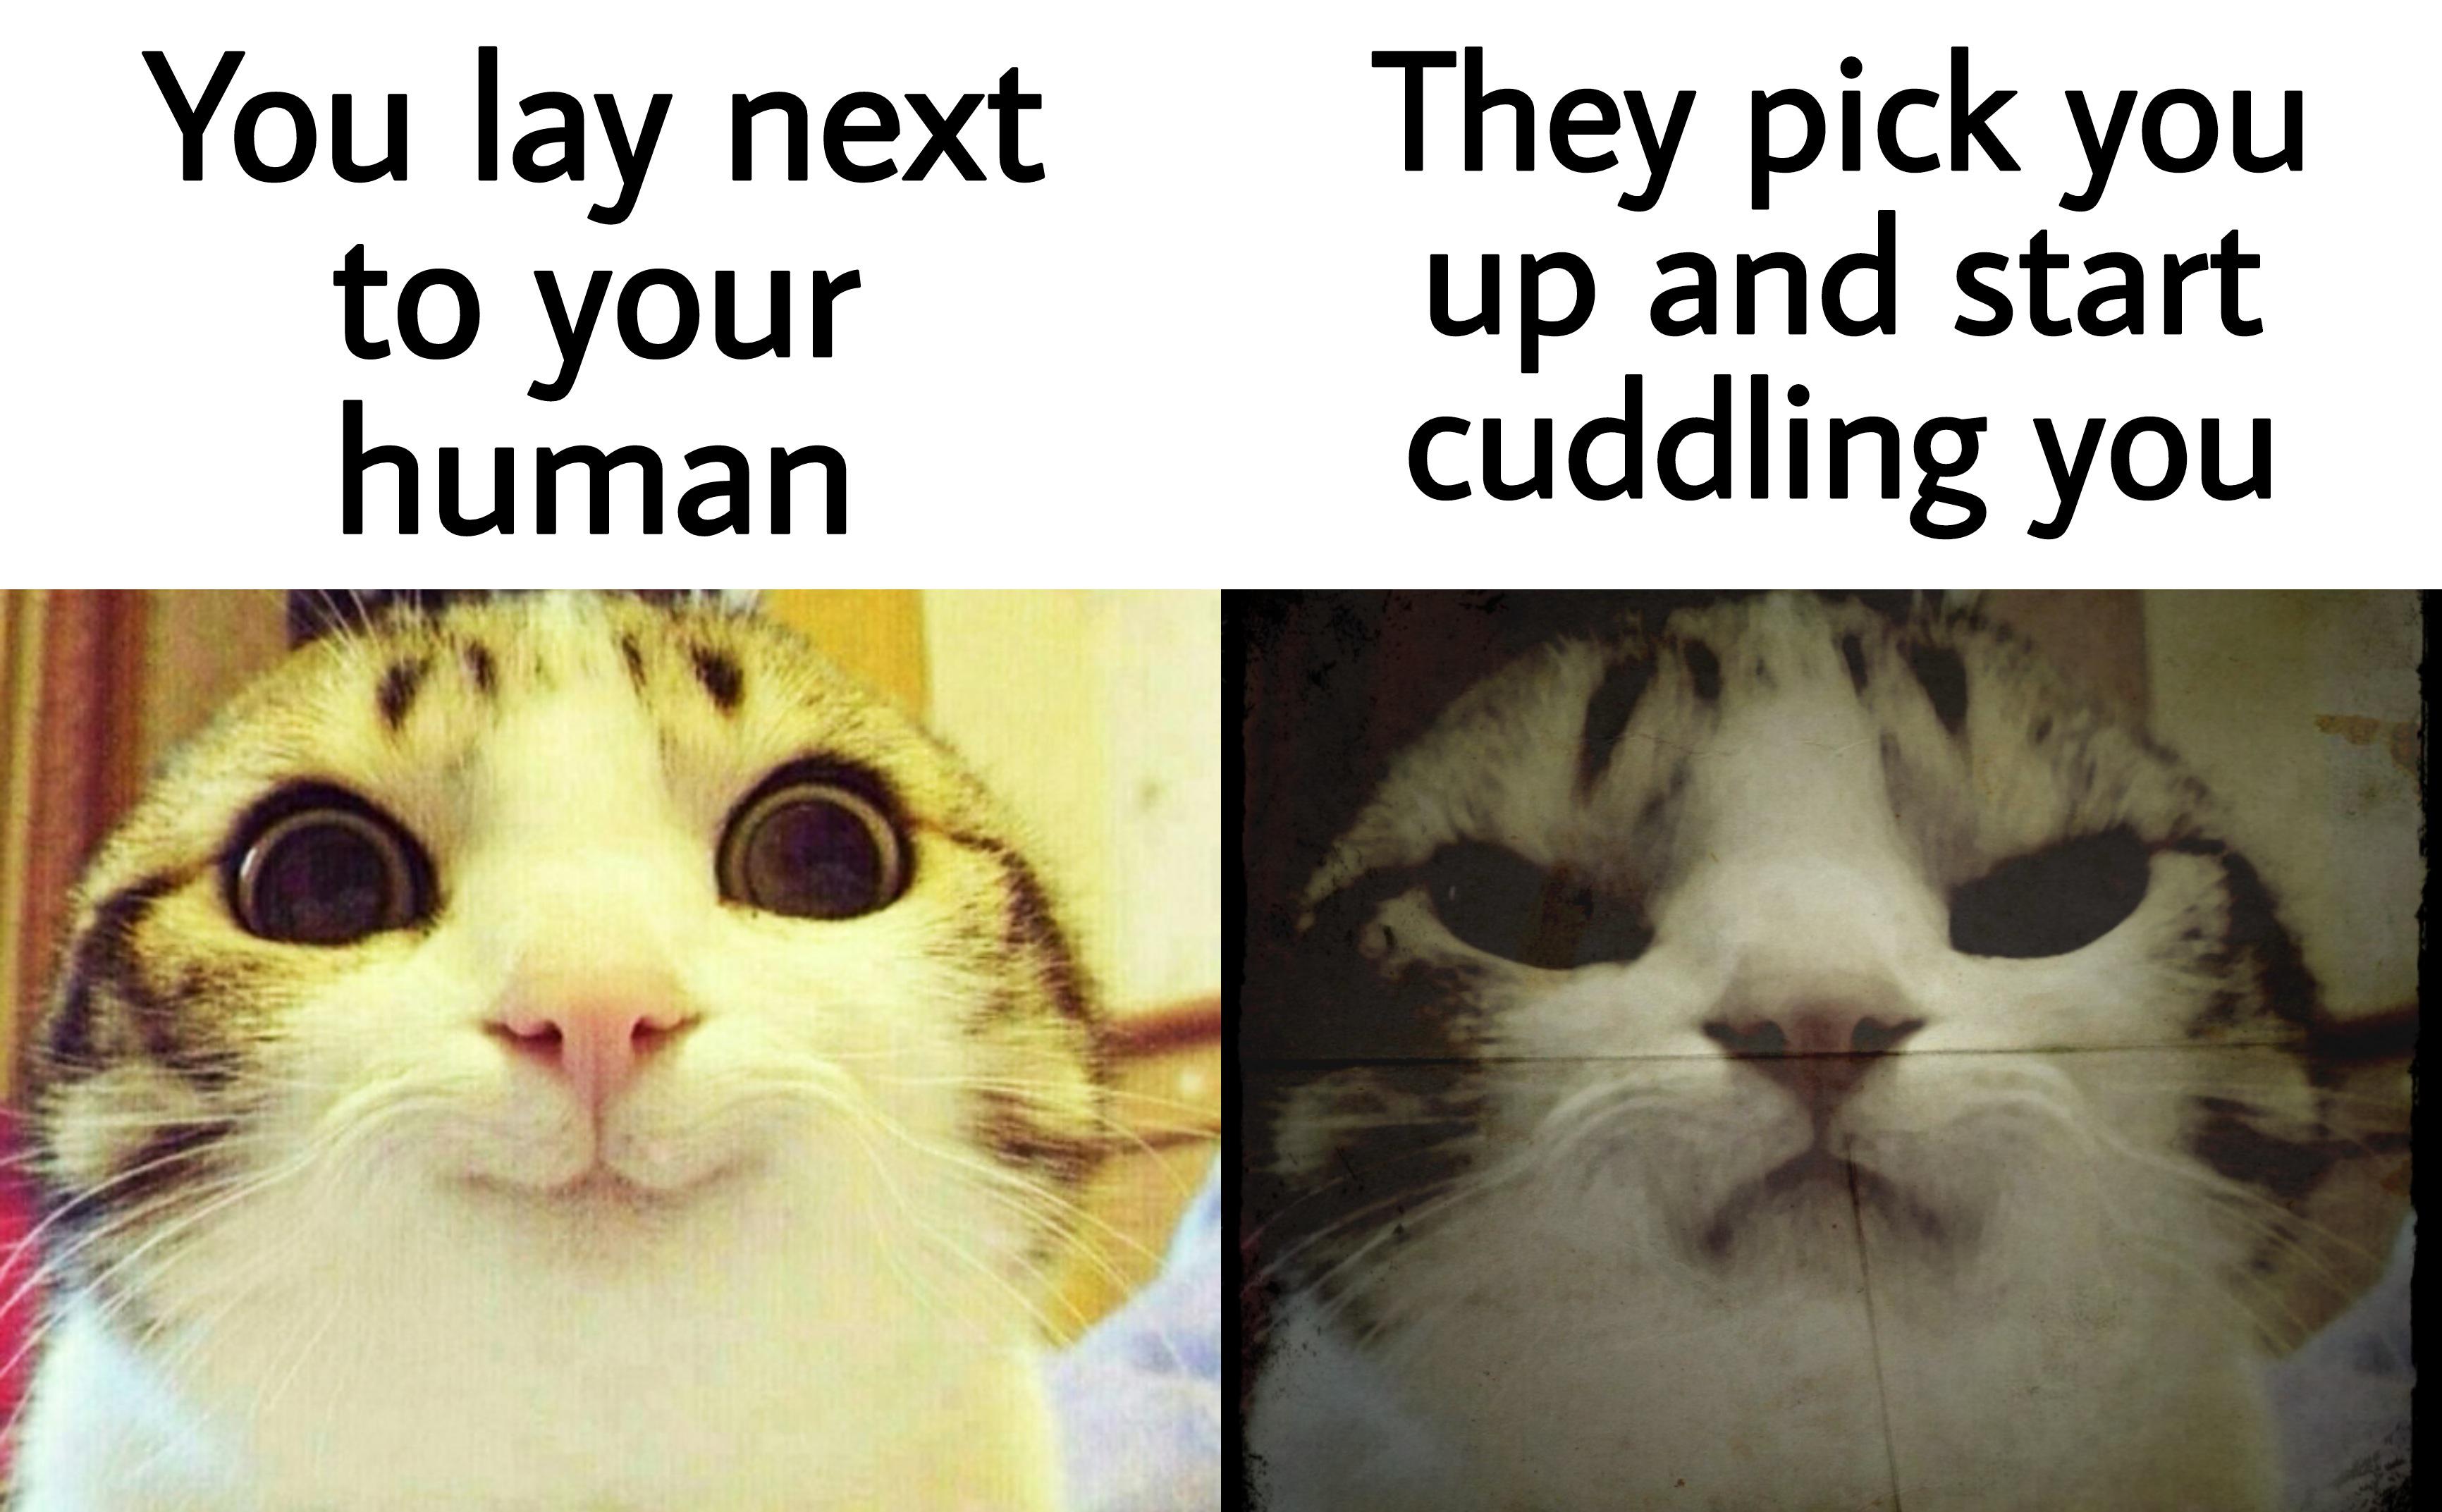 dank memes - german meme - They pick you You lay next to your human up and start cuddling you